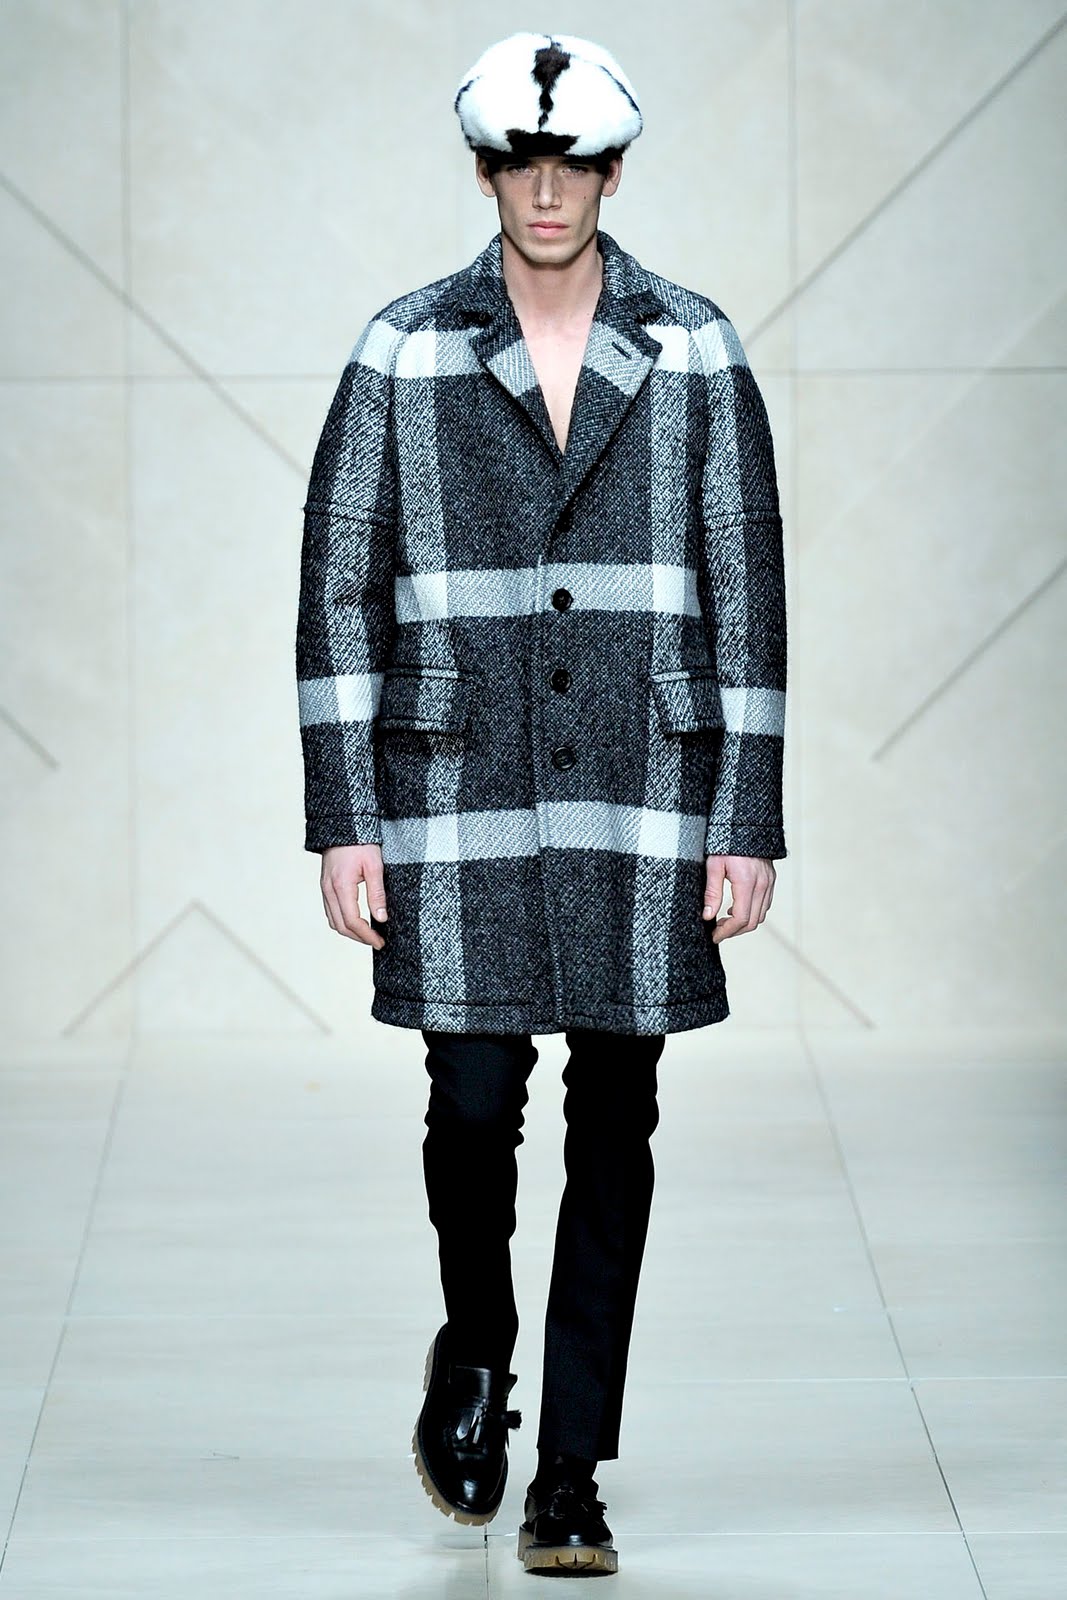 Wearable Trends: 12 Looks We Loved the Most from the Burberry Prorsum ...